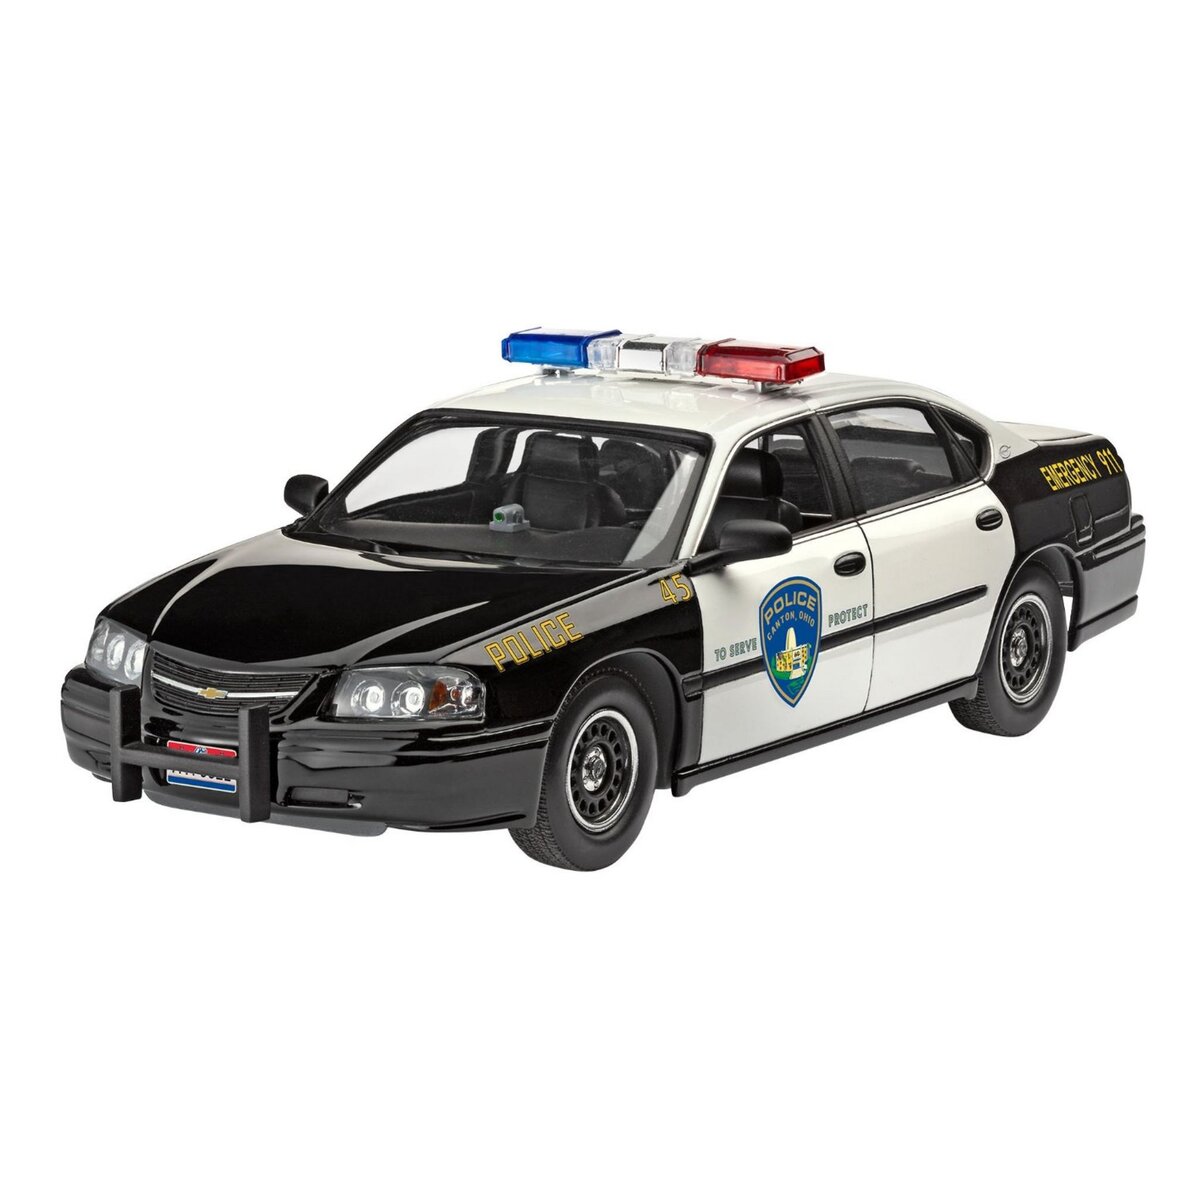 REVELL Maquette Chevy Impala Police Car 07068